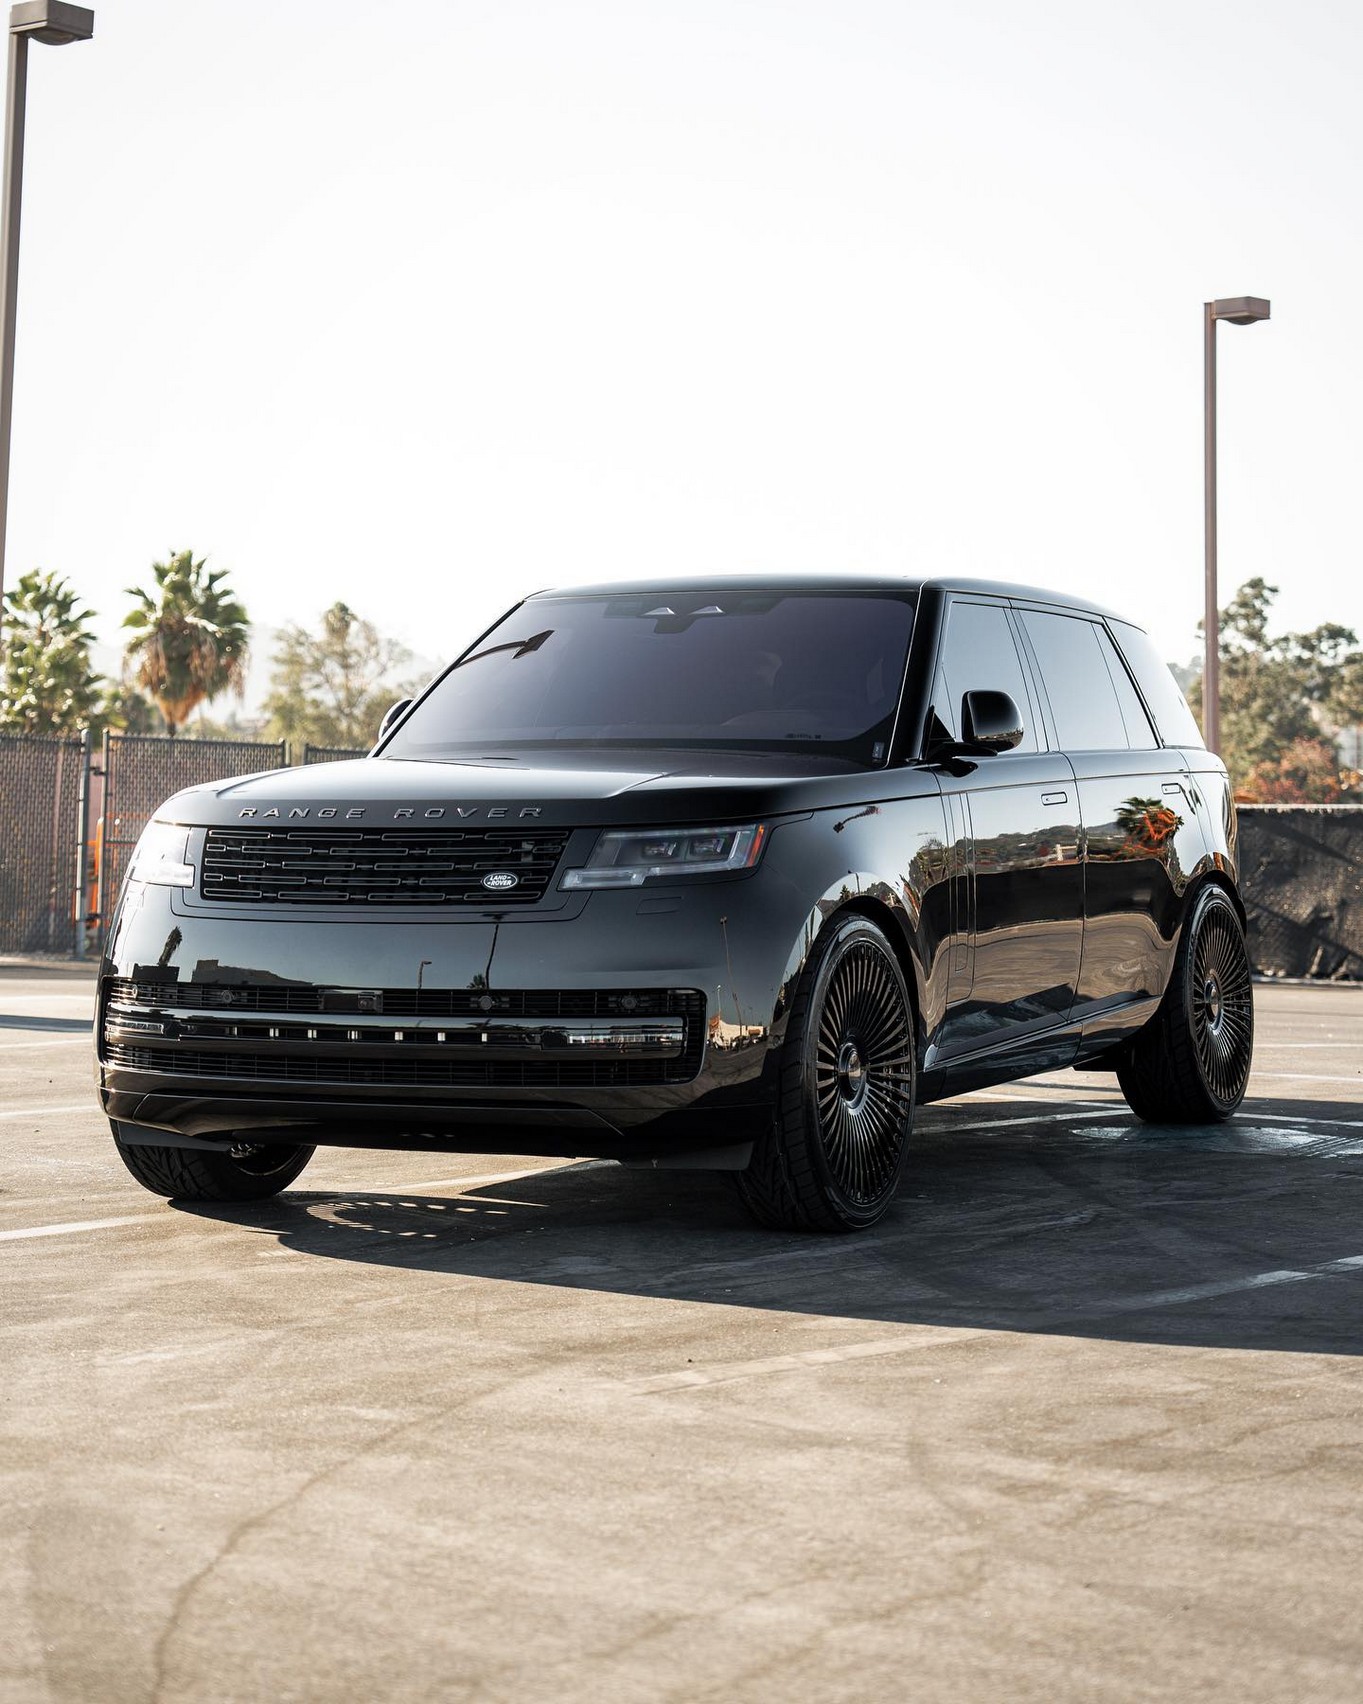 BlackedOut Range Rover Joins the MurderedOut Crowd on Posh RDB Wire